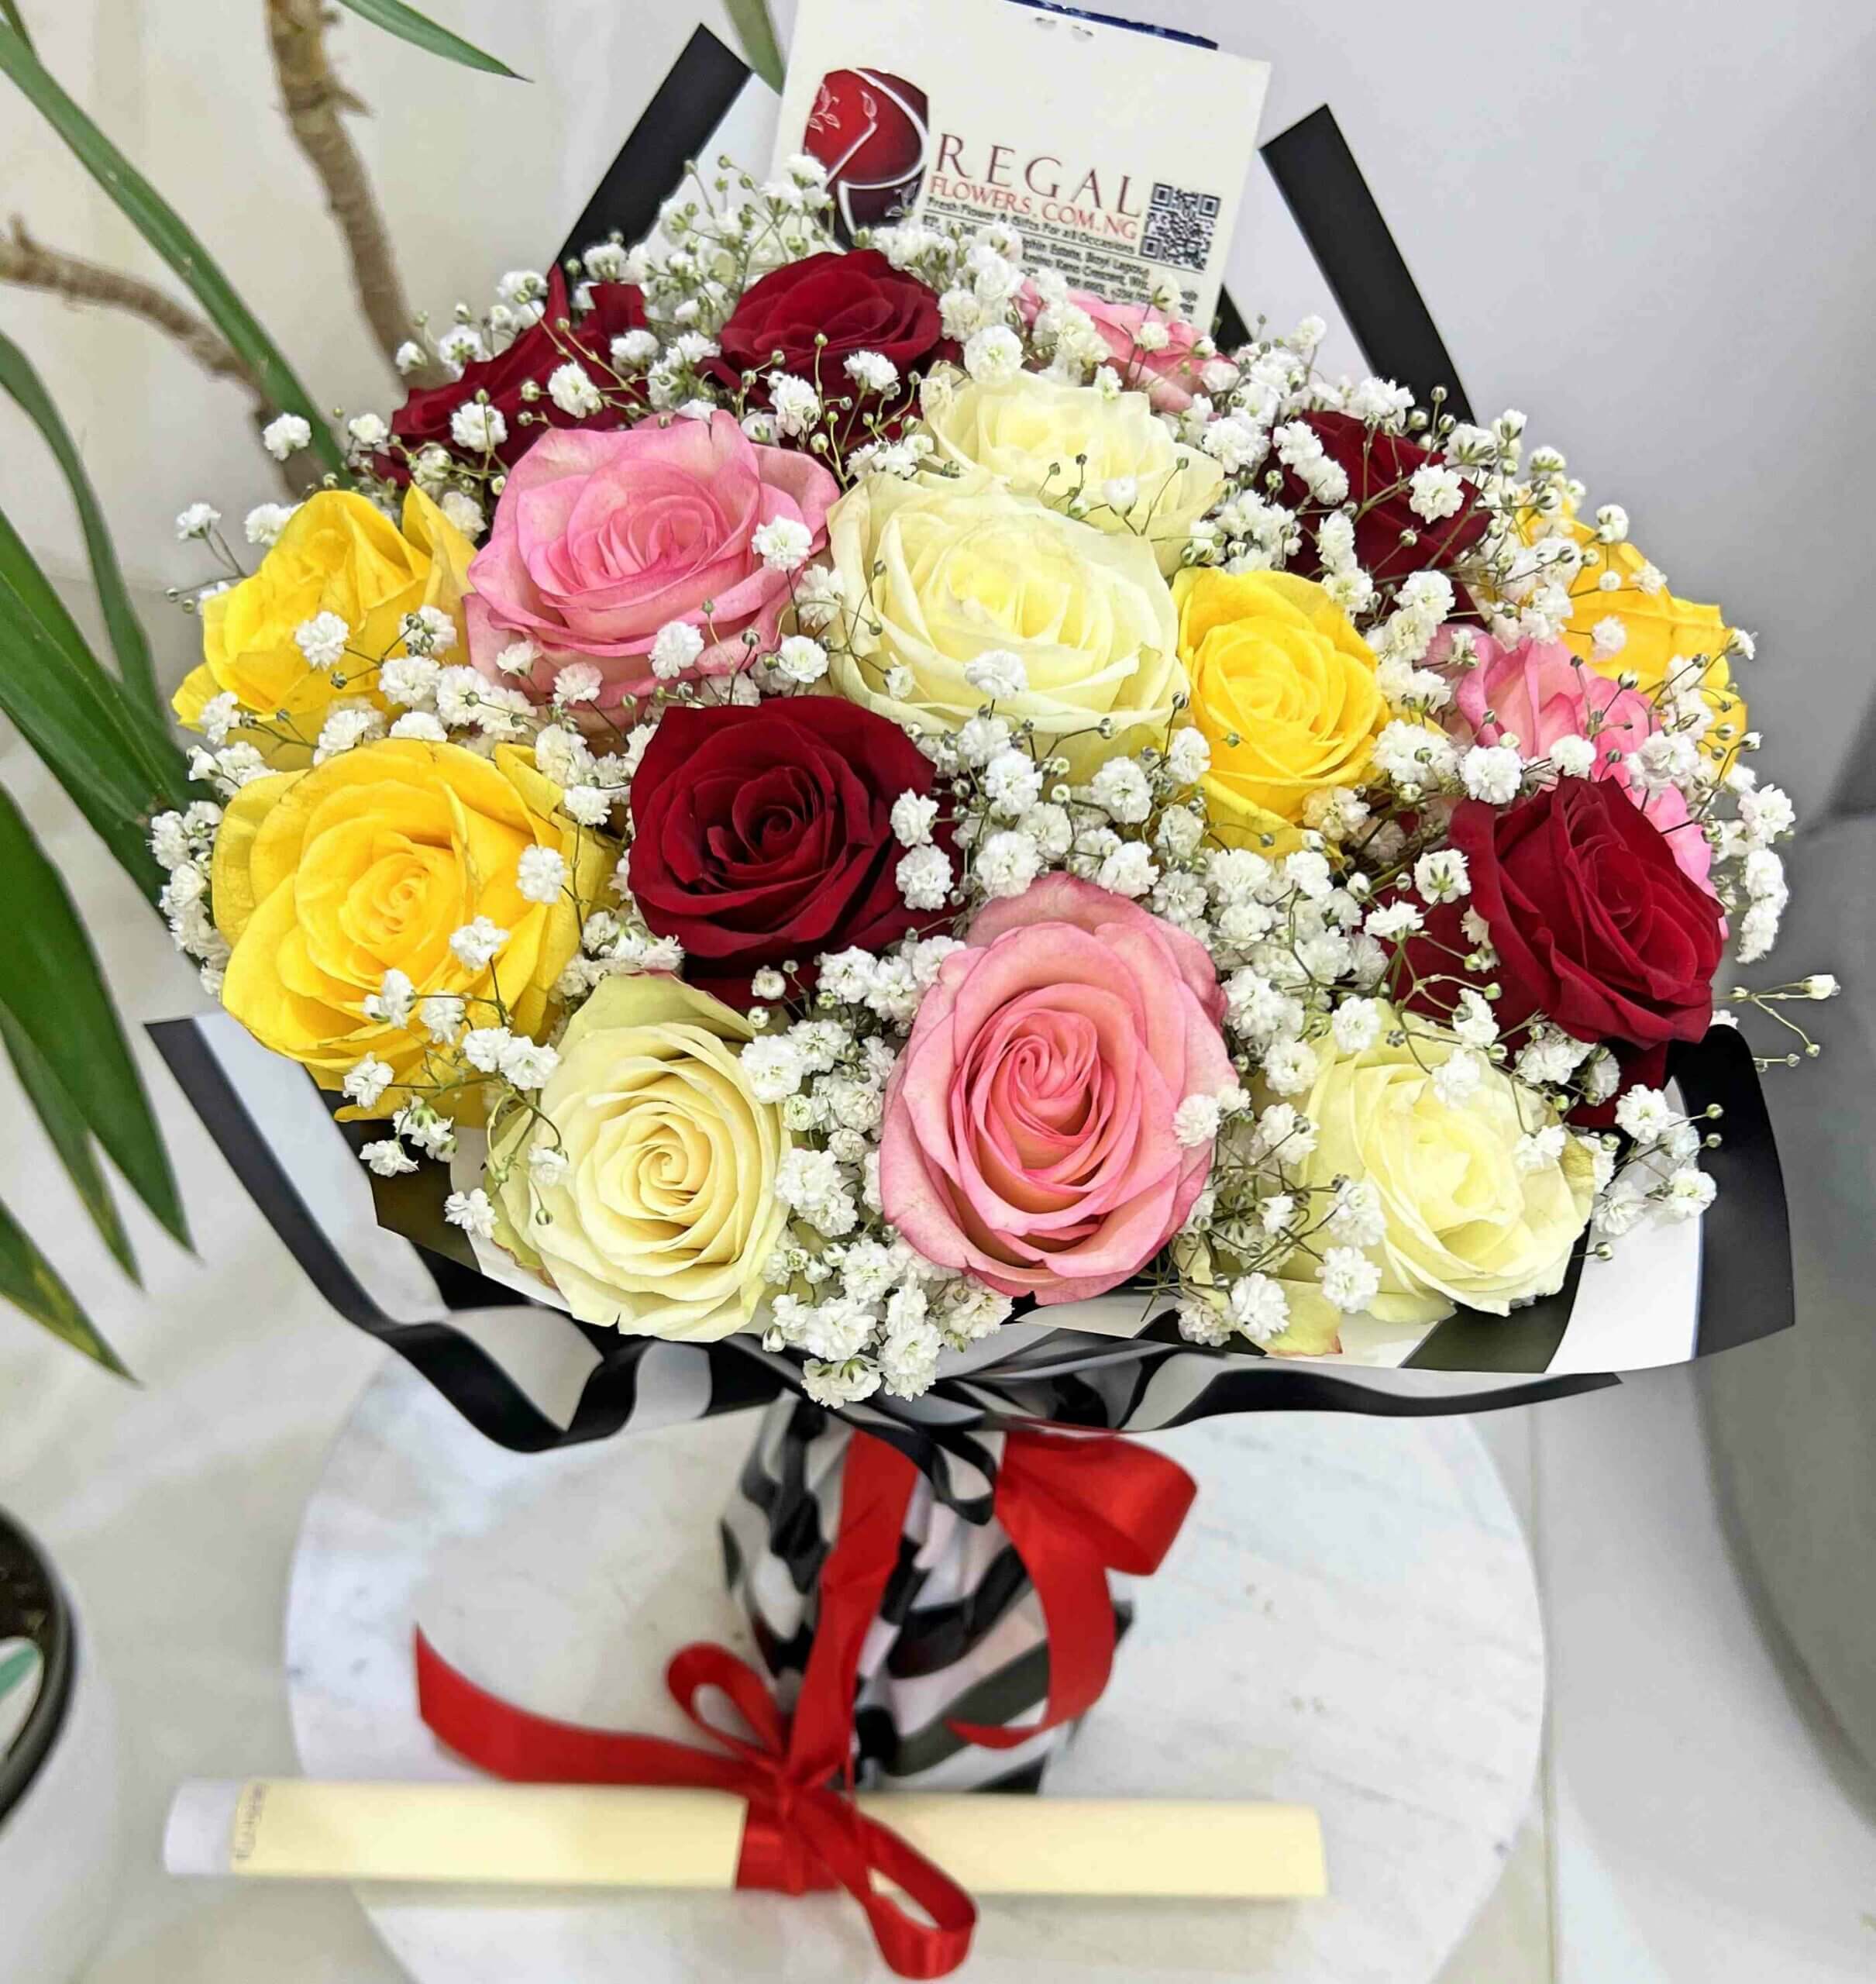 Regal Mix Roses Red Roses white Roses, Yellow Roses and MIllion Stares